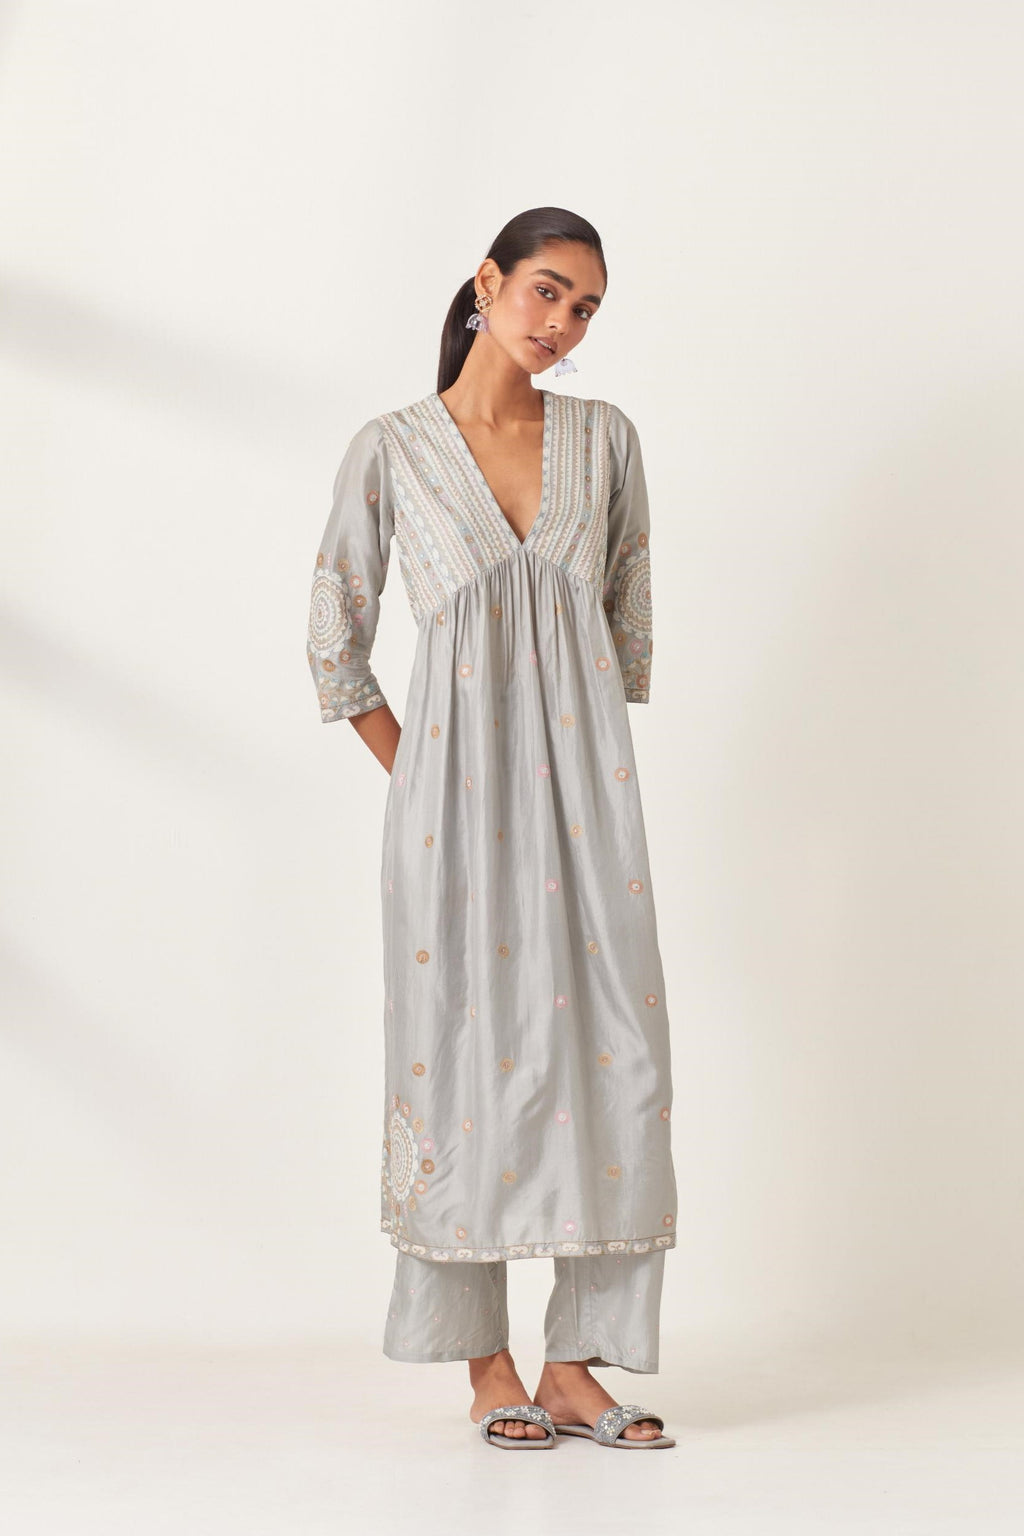 Blue silk kurta dress set with appliqué stripes along with aari threadwork flowers and floral trellises along with a circular appliqued motif and fine gathers at empire line.